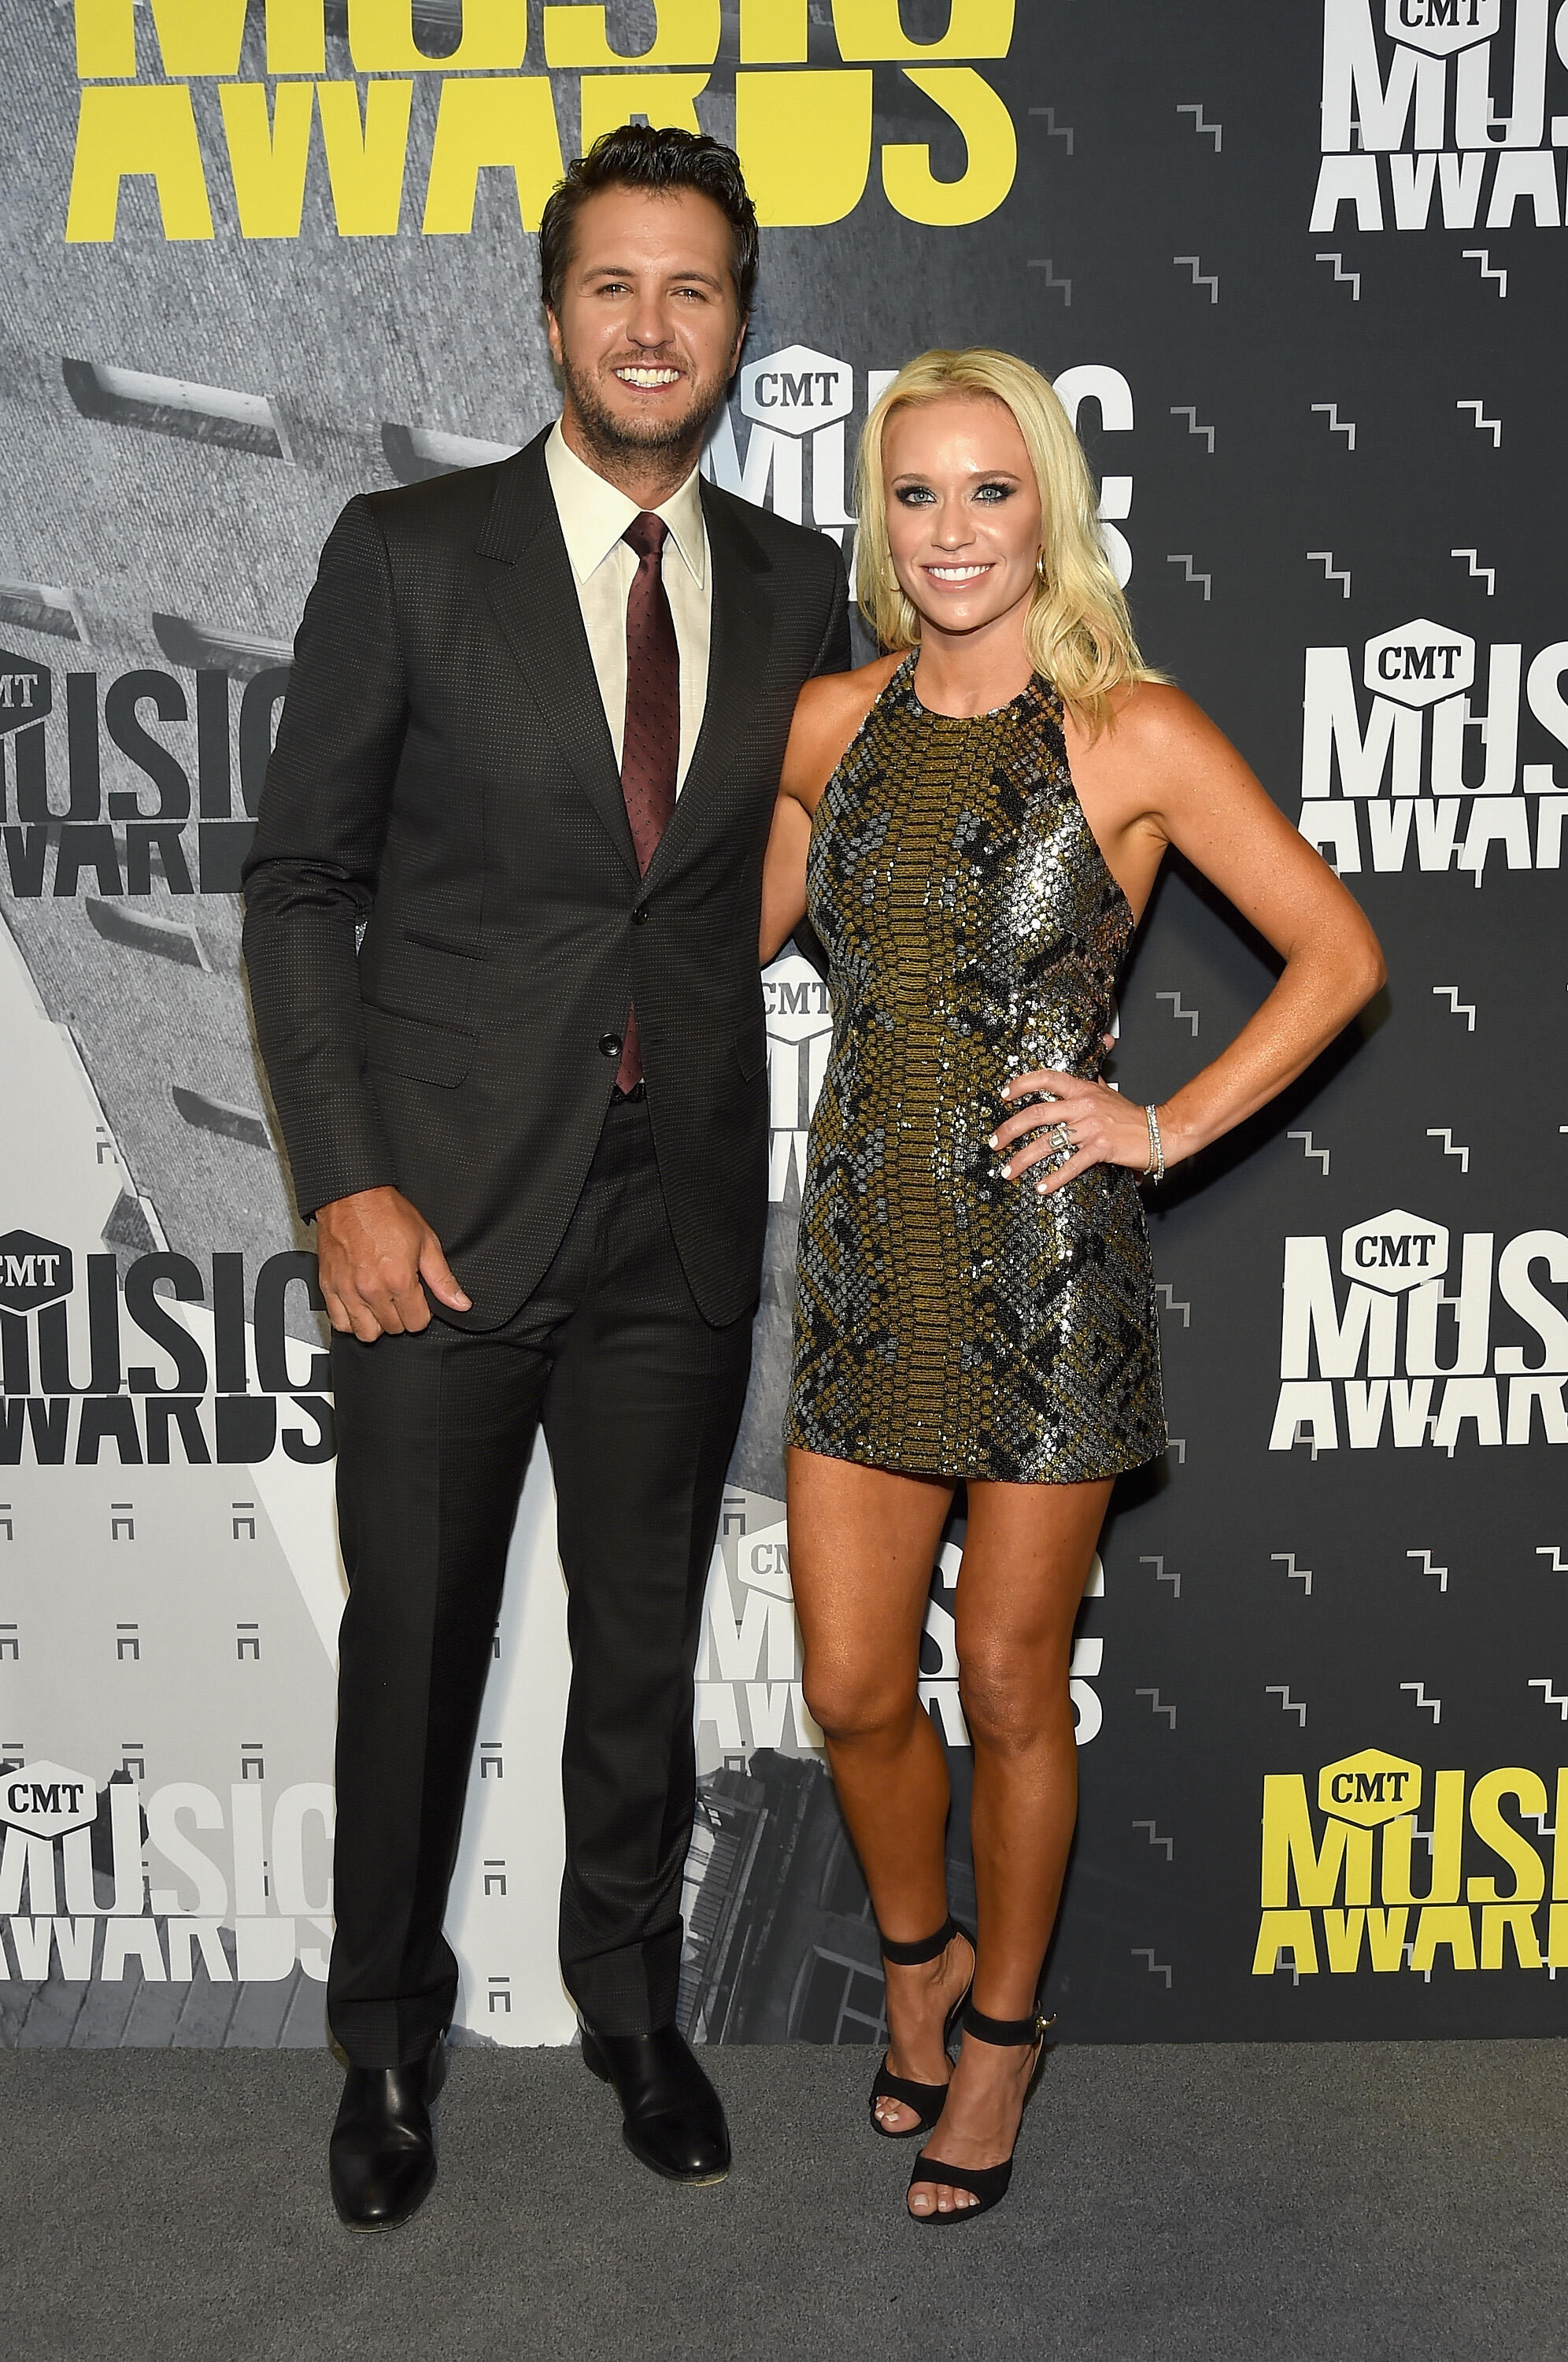 NASHVILLE, TN - JUNE 07: Singer-songwriter Luke Bryan (L) and Caroline Boyer attend the 2017 CMT Music awards at the Music City Center on June 7, 2017 in Nashville, Tennessee.  (Photo by Rick Diamond/Getty Images for CMT)